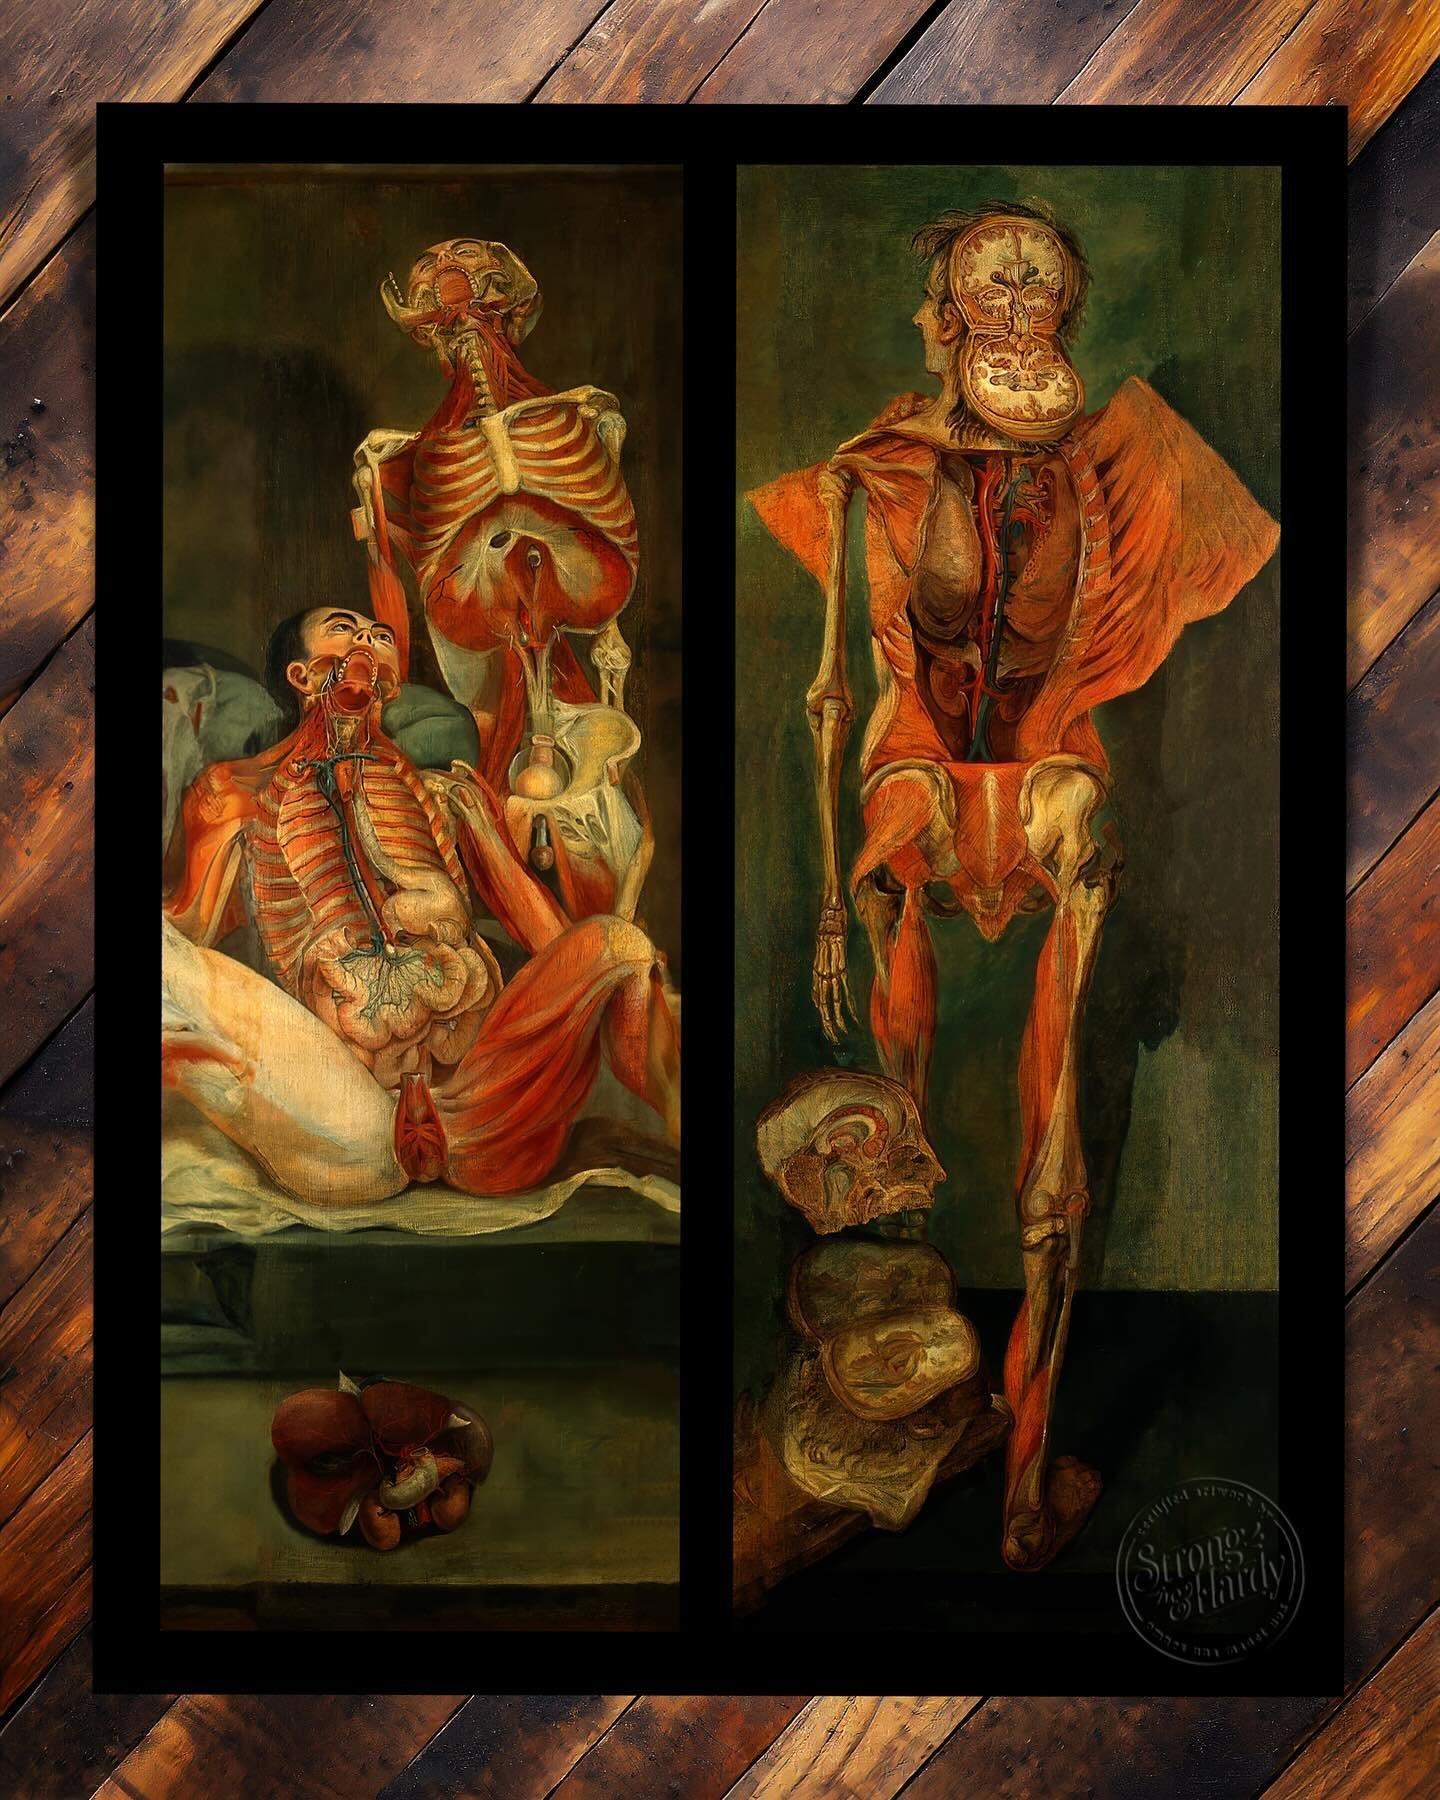 So, we&rsquo;ve had framed restored reproductions of two of Jacques-Fabian Gautier D&rsquo;Agoty&rsquo;s incredible anatomical diptychs hanging in our booth at many of the Oddities and Curiosities Expos this year and have gotten numerous requests for